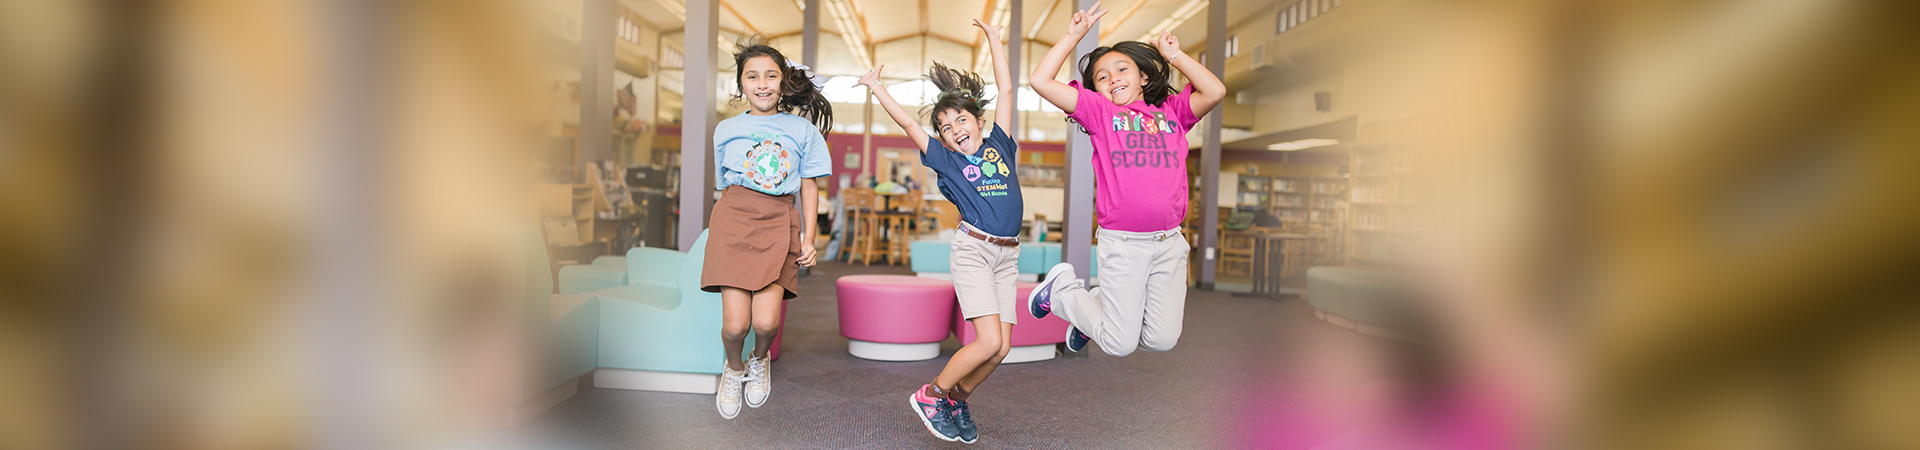  Three Brownie Girl Scouts jumping in a library 